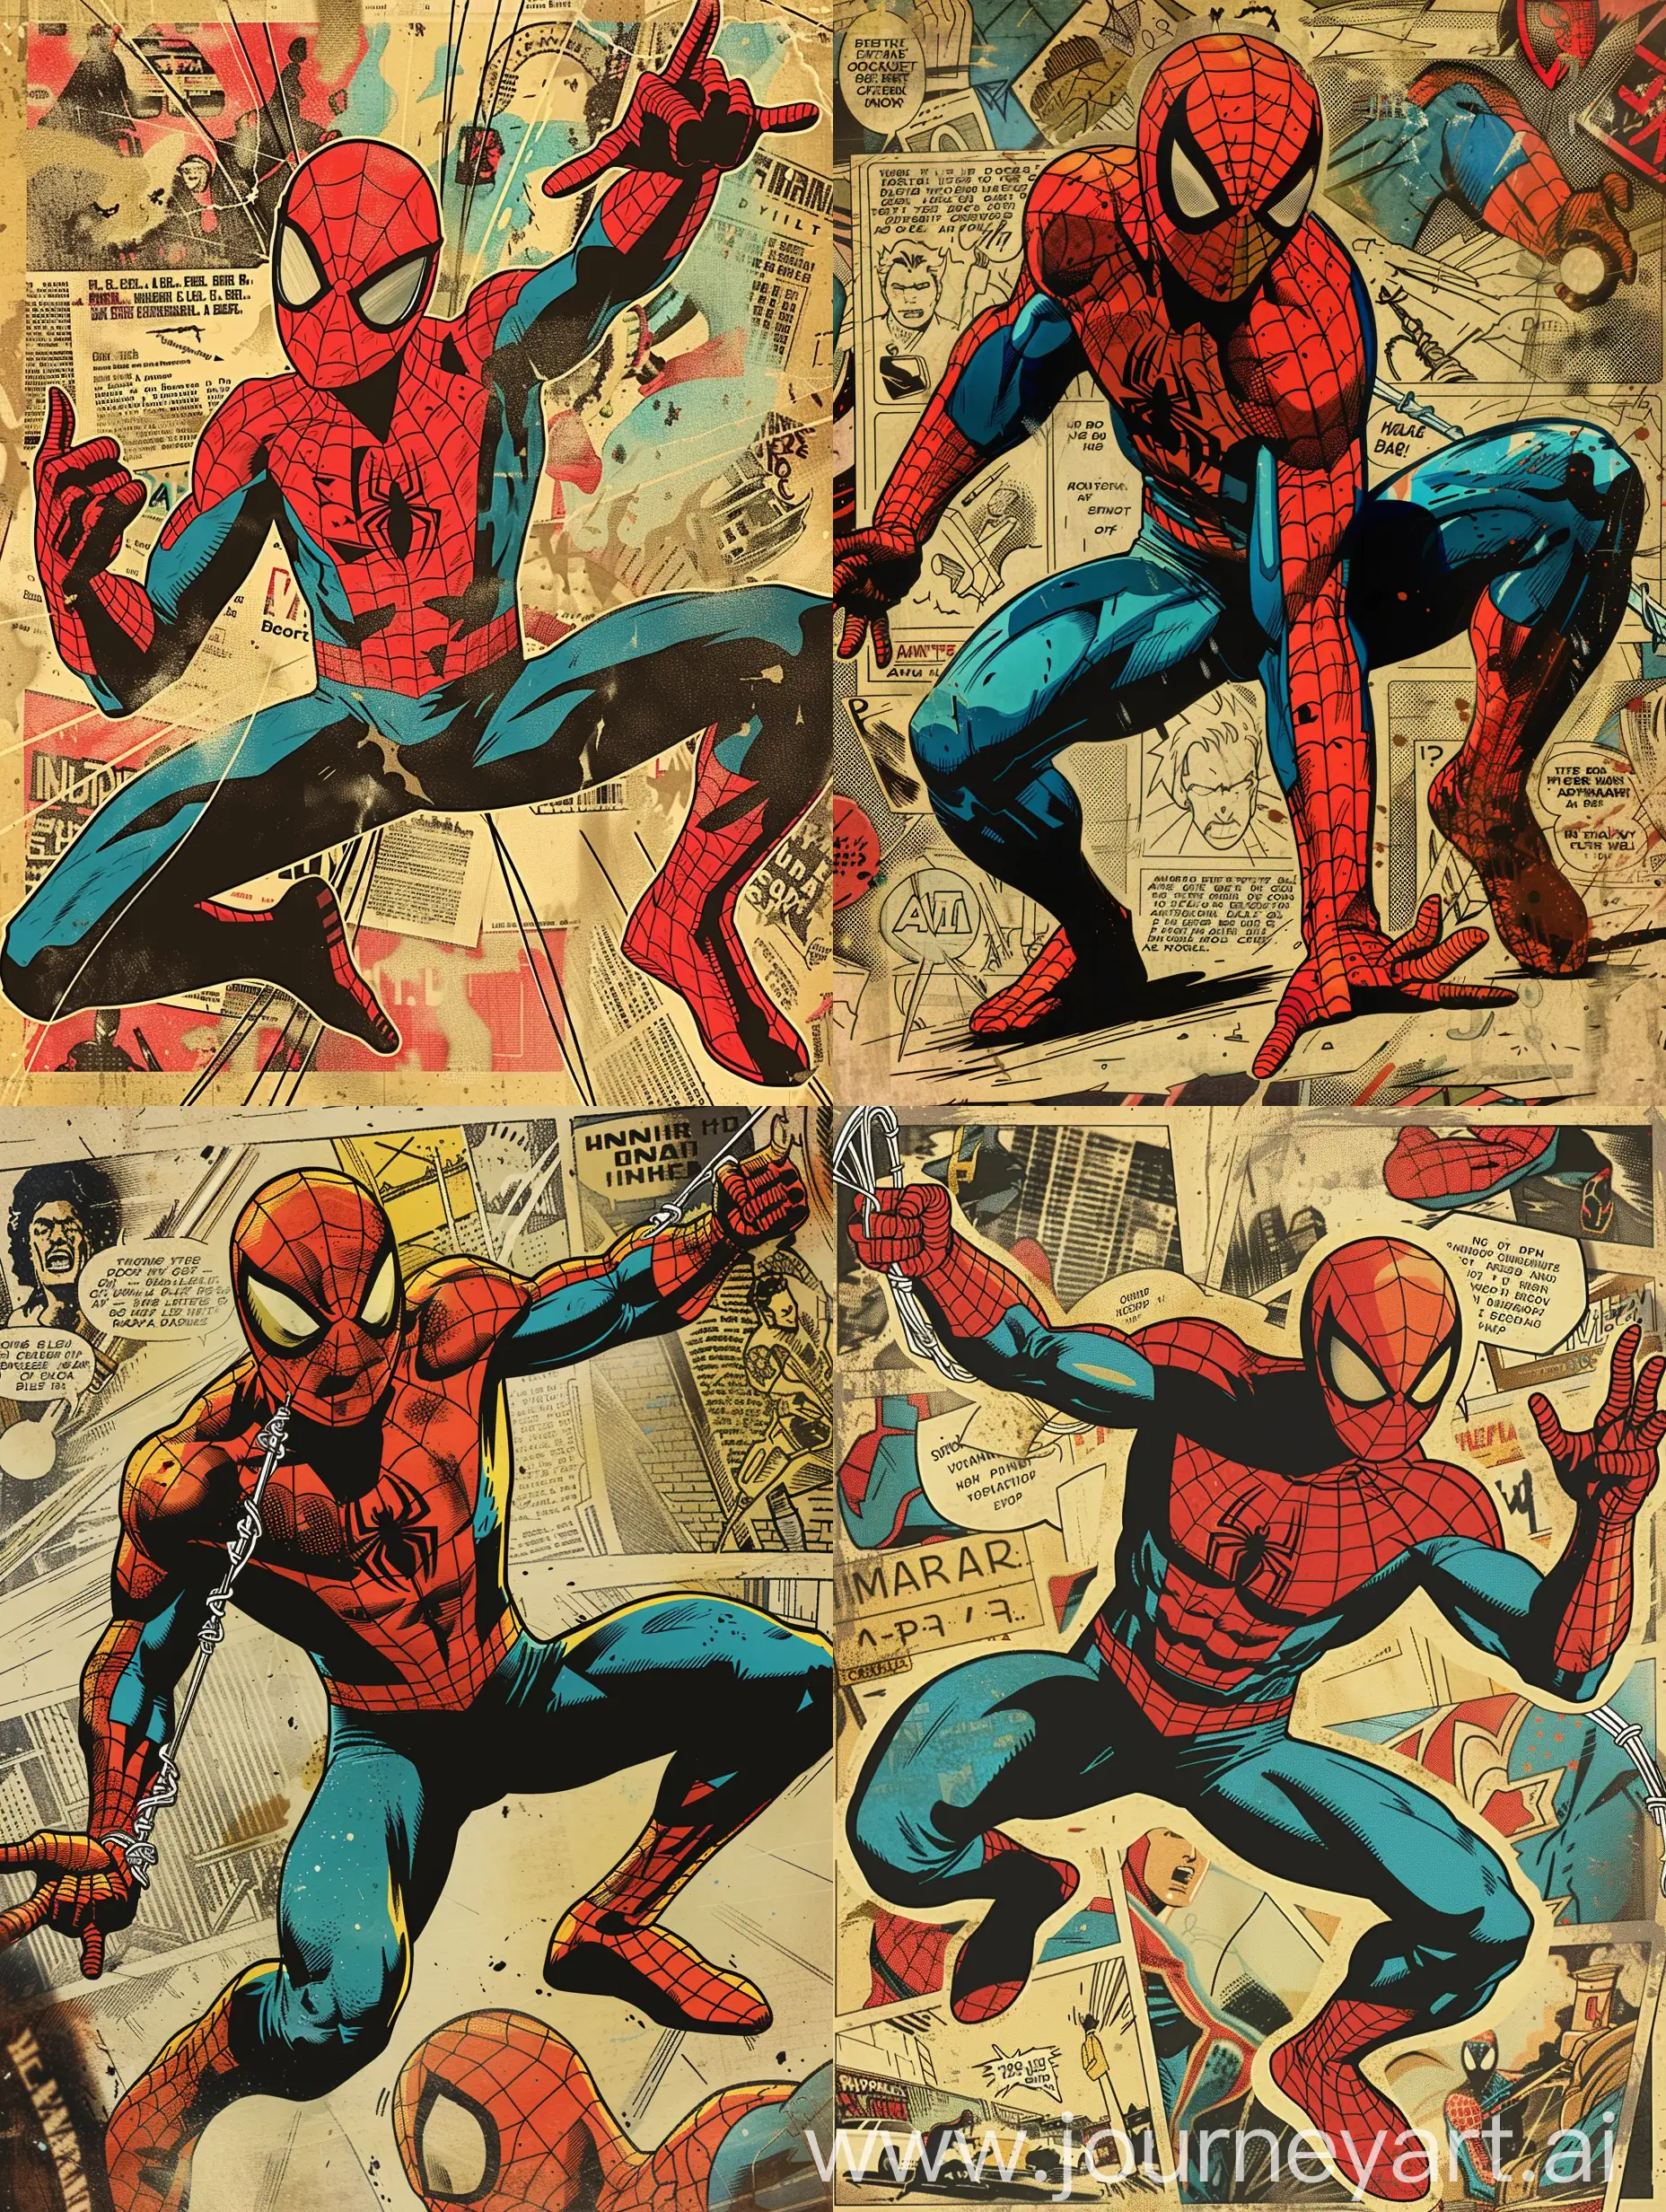 Dynamic-SpiderMan-Comic-Wallpaper-Iconic-Red-and-Blue-Costume-in-Action